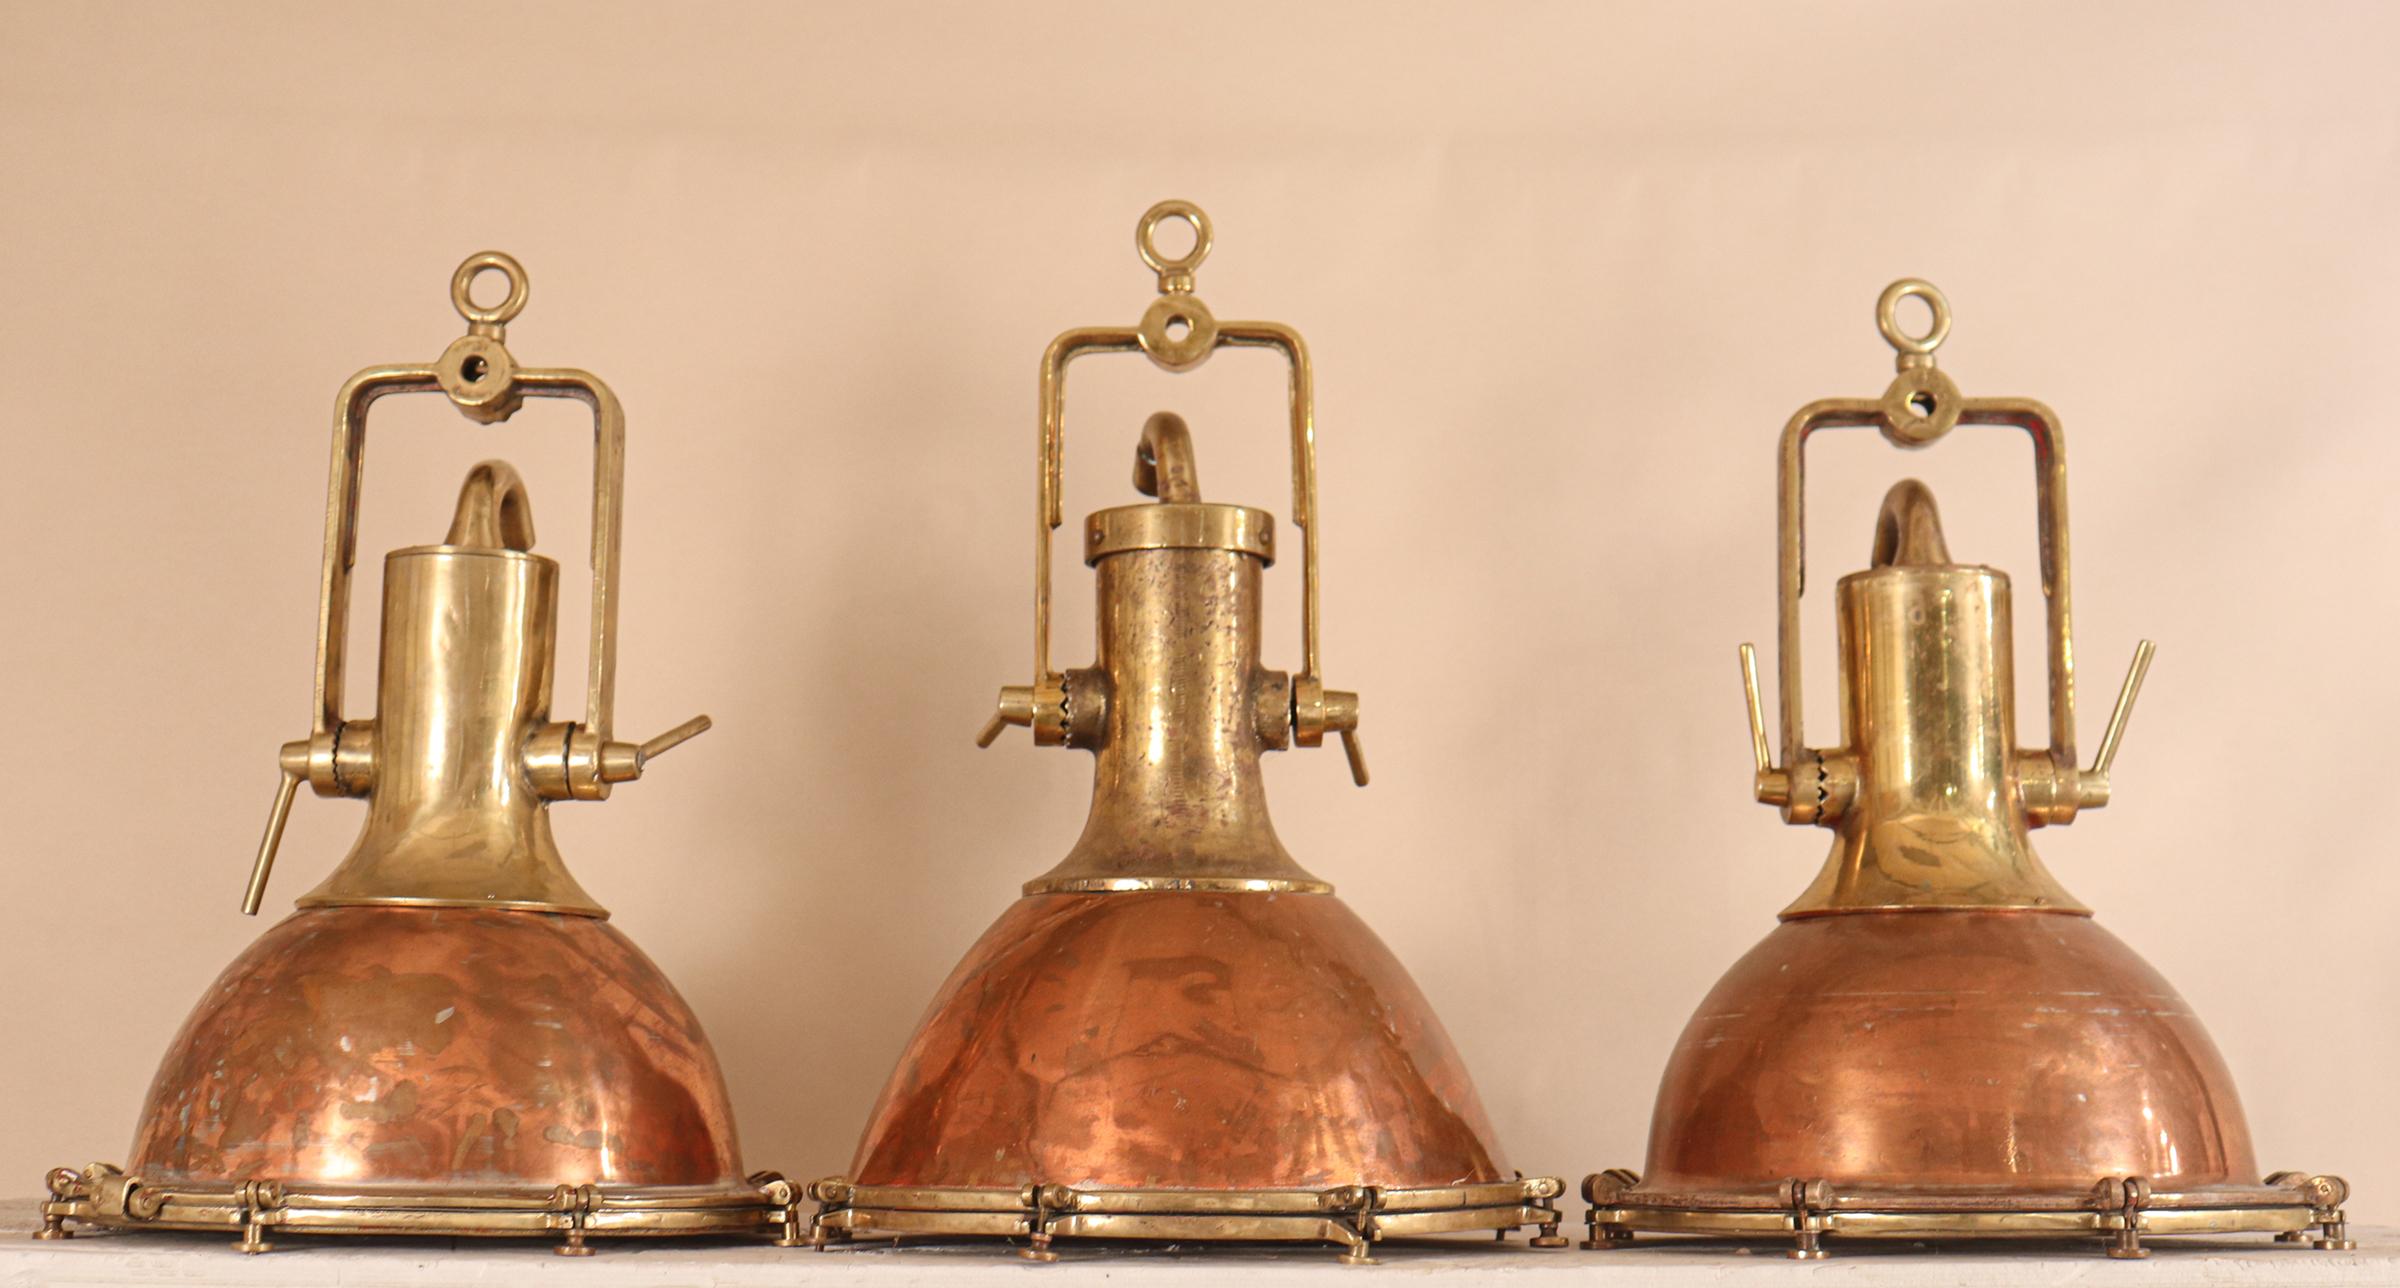 An authentic set of large copper and brass ship's deck lights with superb form and patina, circa 1950. Salvaged from a maritime vessel and attentively restored to near-original condition, these nautical pendants suspend from adjustable solid brass